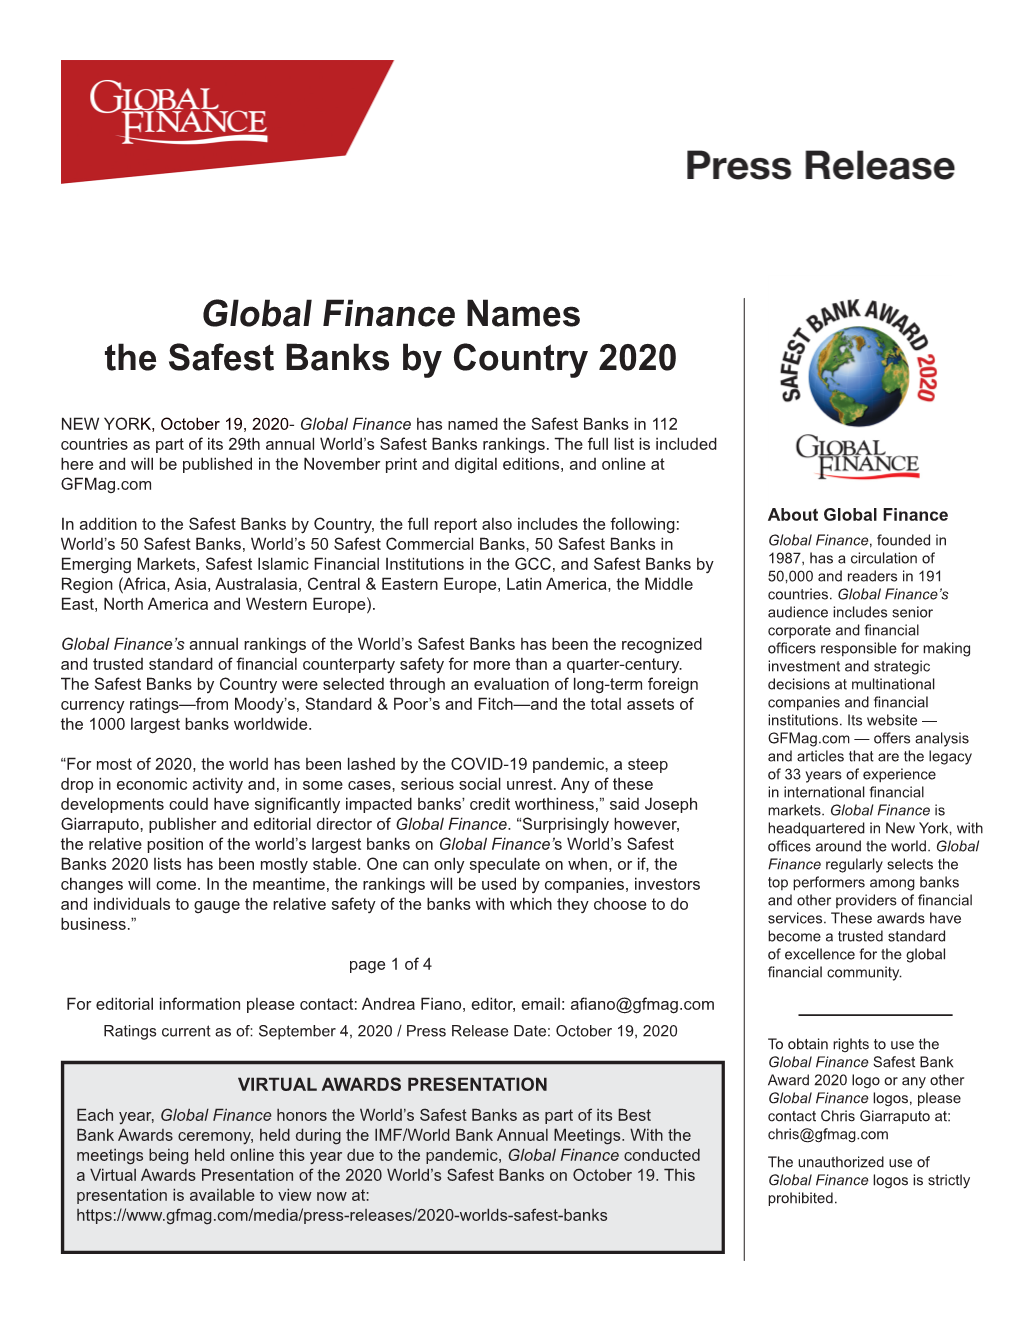 Global Finance Names the Safest Banks by Country 2020